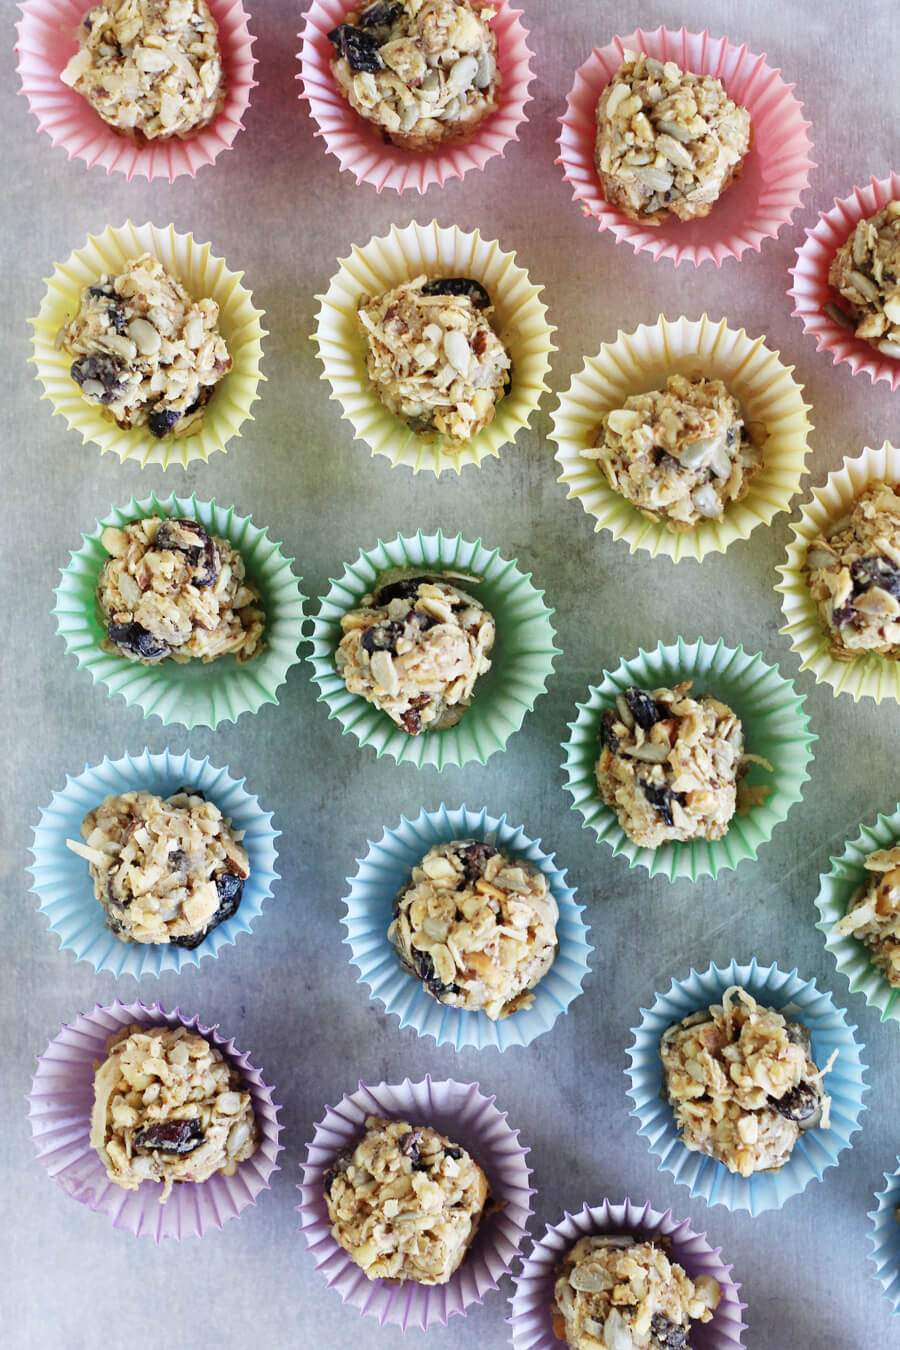 Have hungry kids begging for an after school snack the minute they get home? These Kid-Friendly Sweet Salty Energy Bites are a no-bake dessert they'll love. You can feel good about these bite-sized treats because of the healthy ingredients.